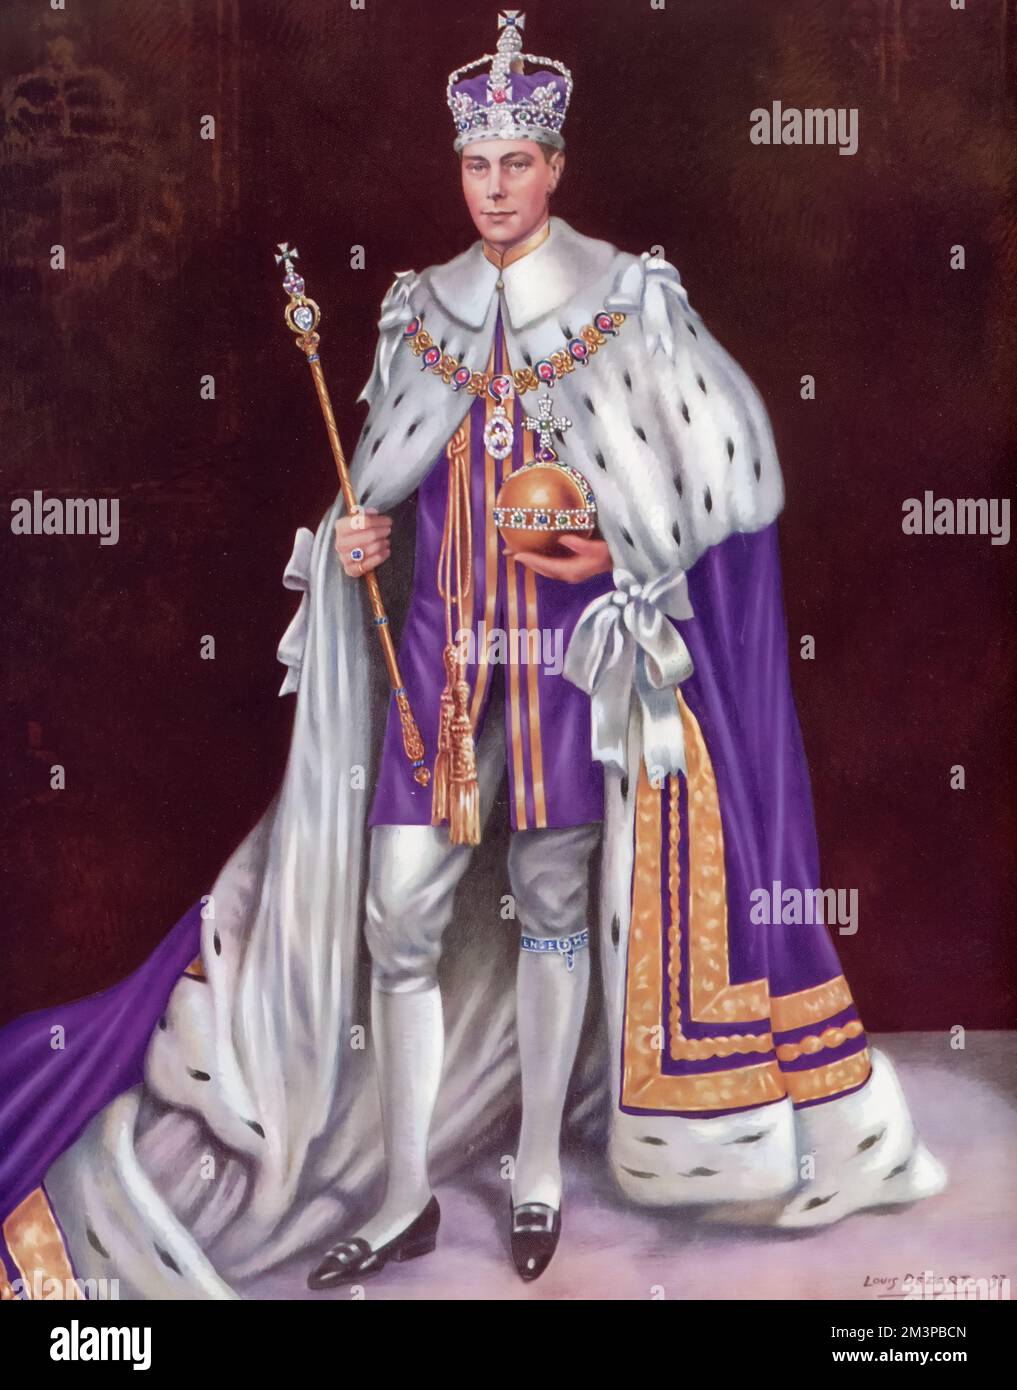 His Majesty King George VI (1895-1952) wearing coronation robes and holding coronation regalia, 1937. By Louis Dezart. George VI's coronation took place on 12th May 1937 at Westminster Abbey, the date previously intended for his brother Edward VIII's coronation. Stock Photo